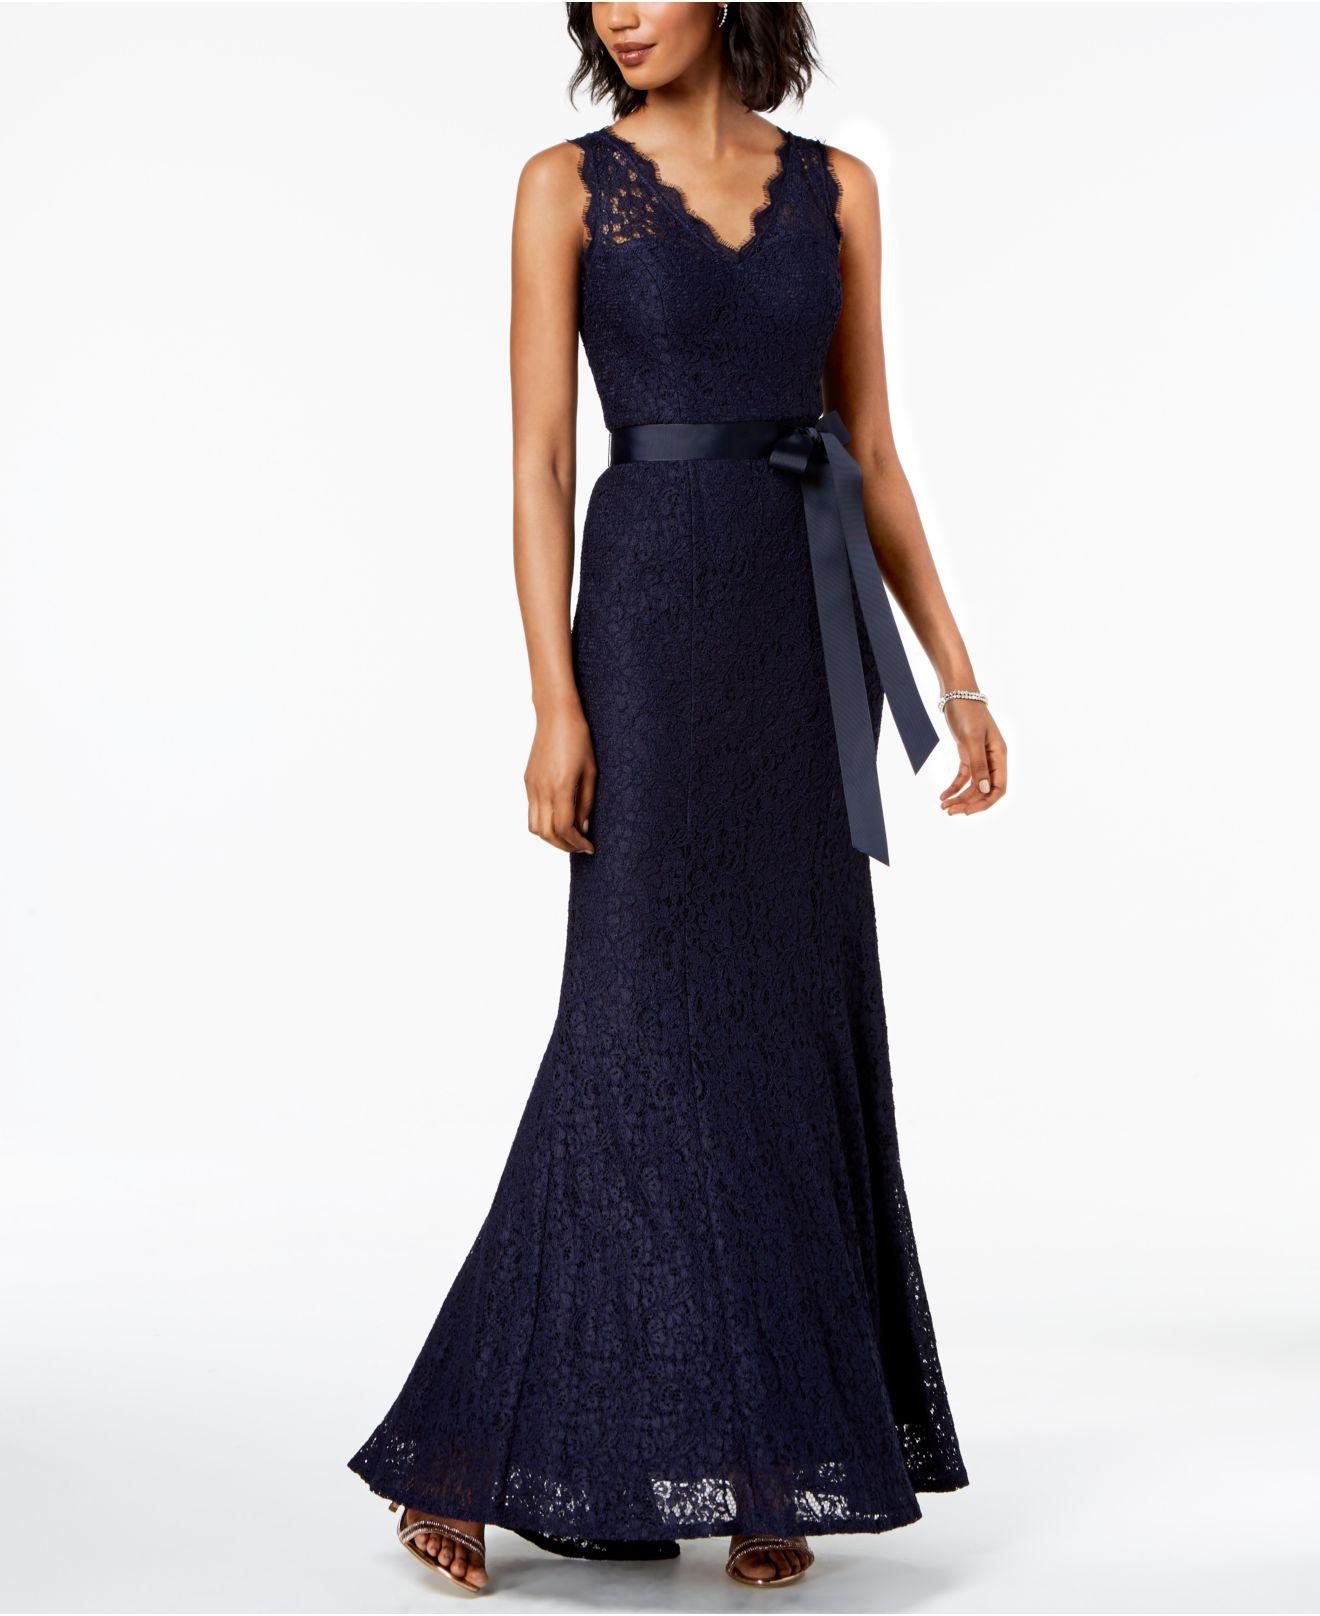 Adrianna Papell Lace V-neck Satin Sash Gown in Navy (Blue) - Lyst